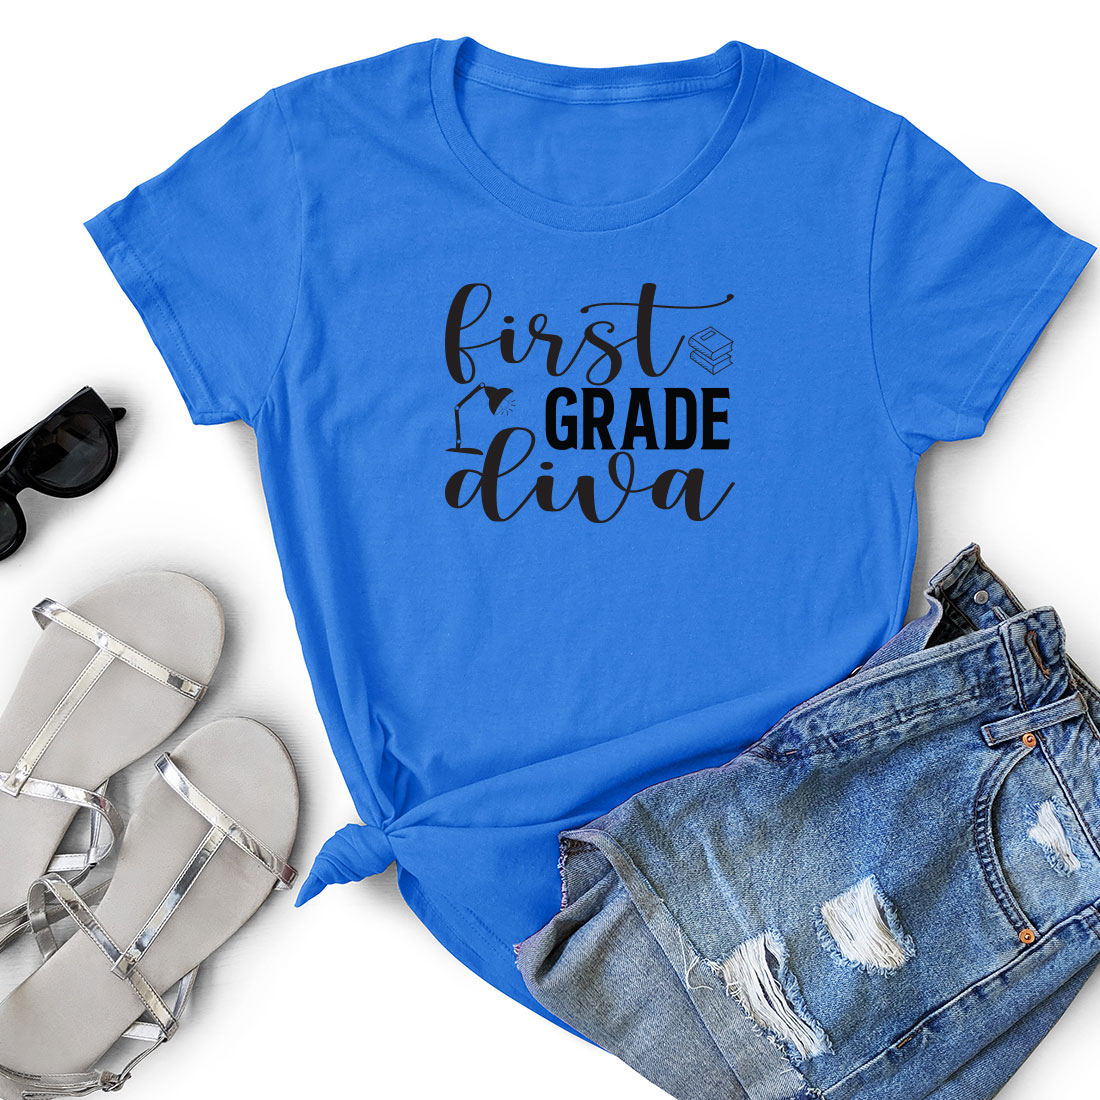 T - shirt that says first grade diva next to a pair of shorts.